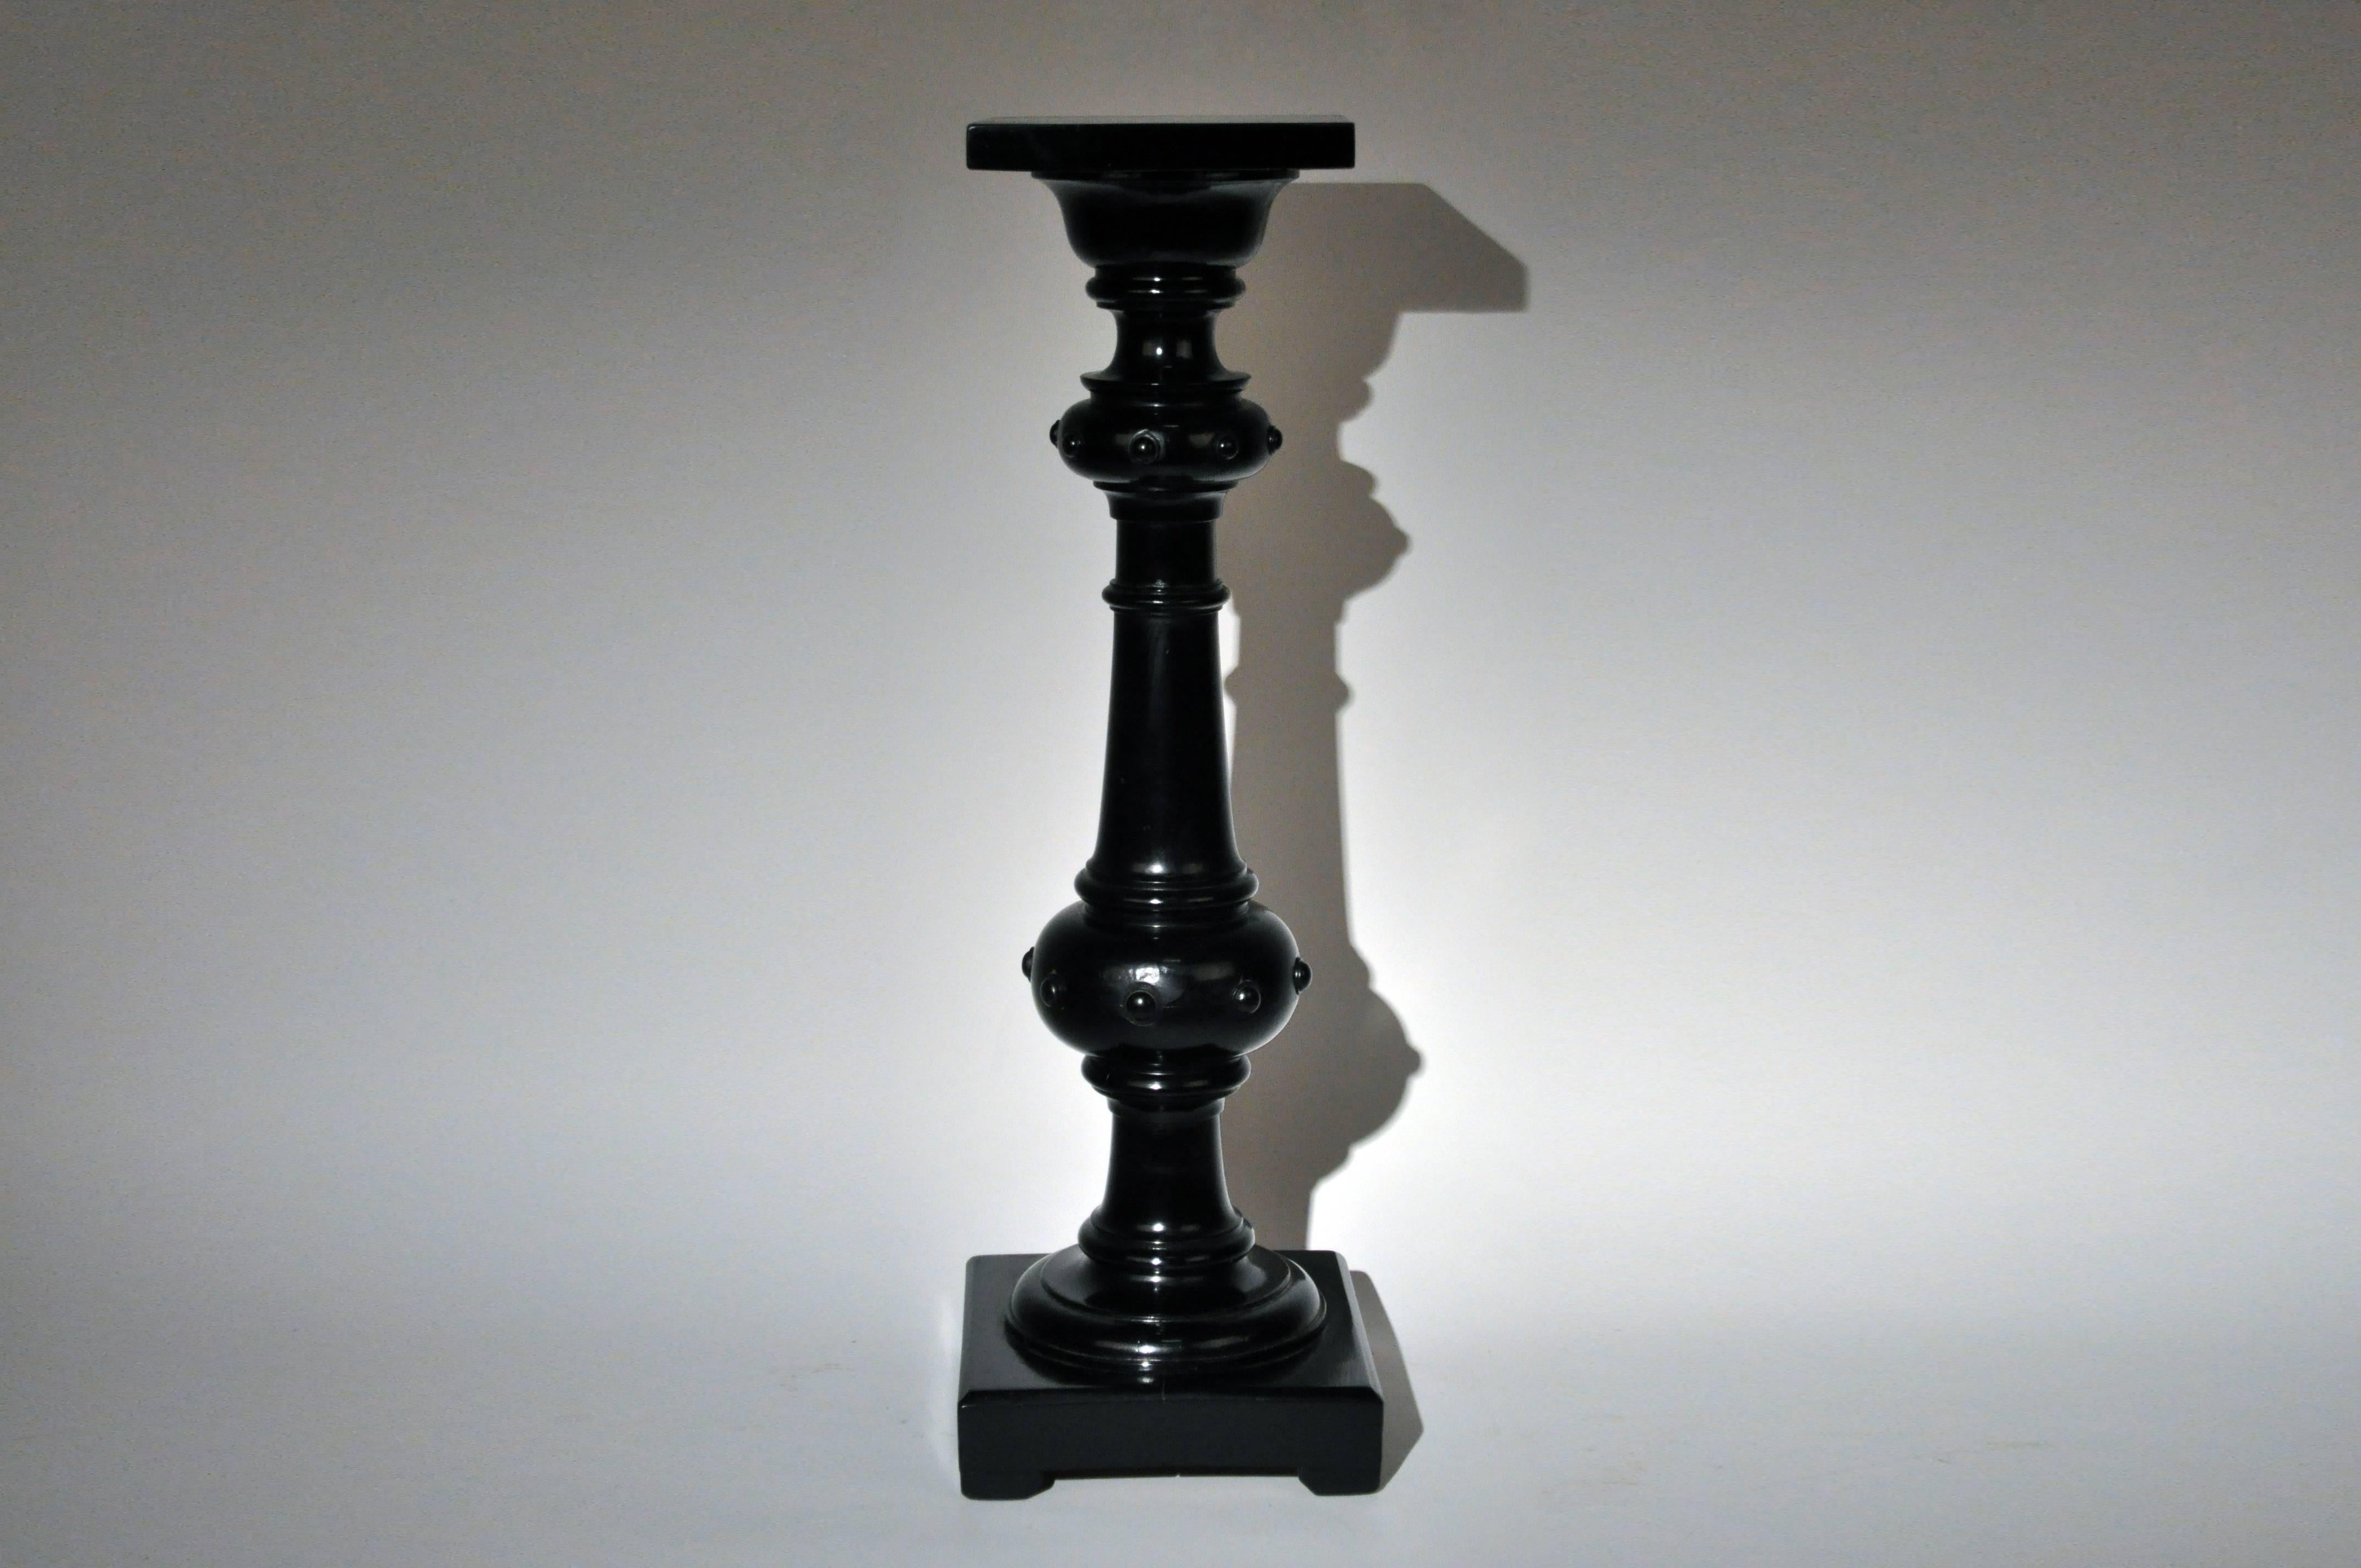 This flower pedestal is from Austrian and is made from oakwood and black lacquer, circa 1900.